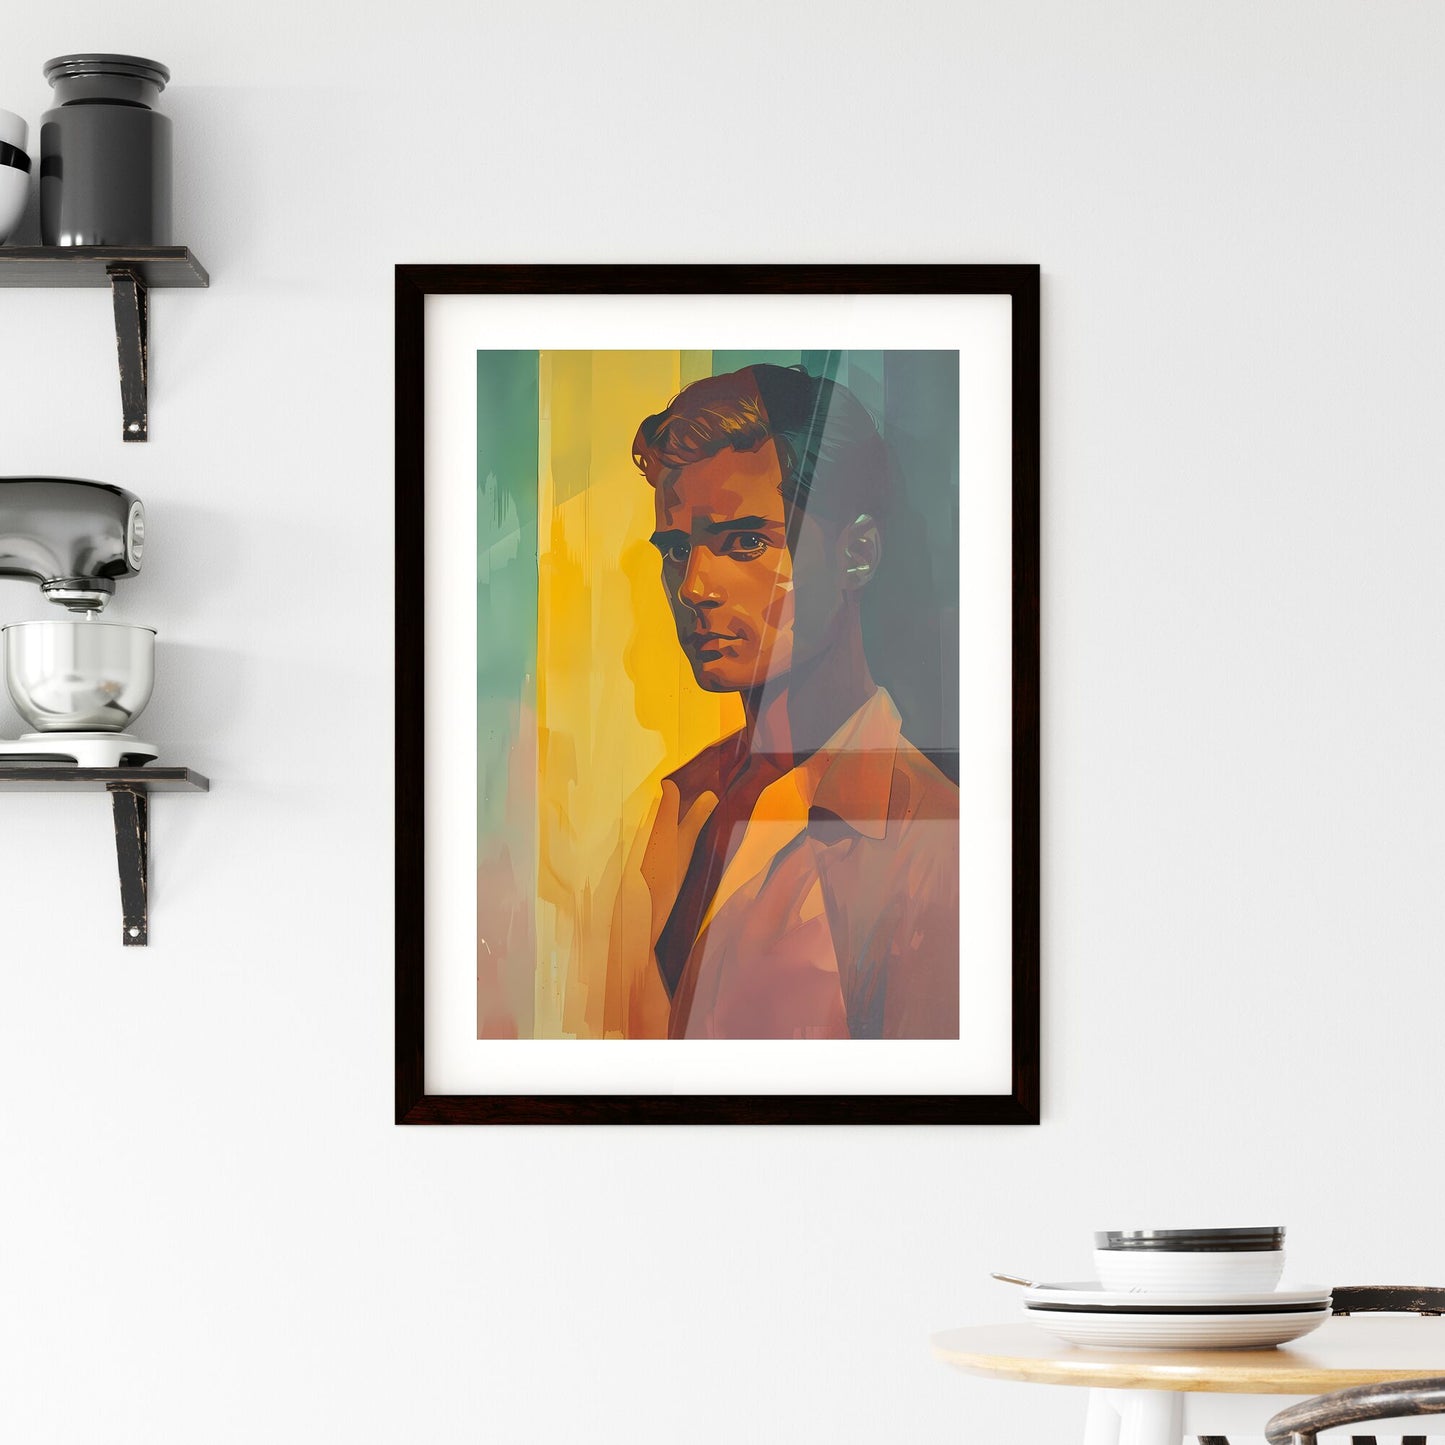 Painting of Daniel Brown in the Shadows: Film Noir-Inspired, Art-Focused, Bronze and Yellow, AP Photo, Vignetting, Mist, Enigmatic Character, Brown Shirt Default Title